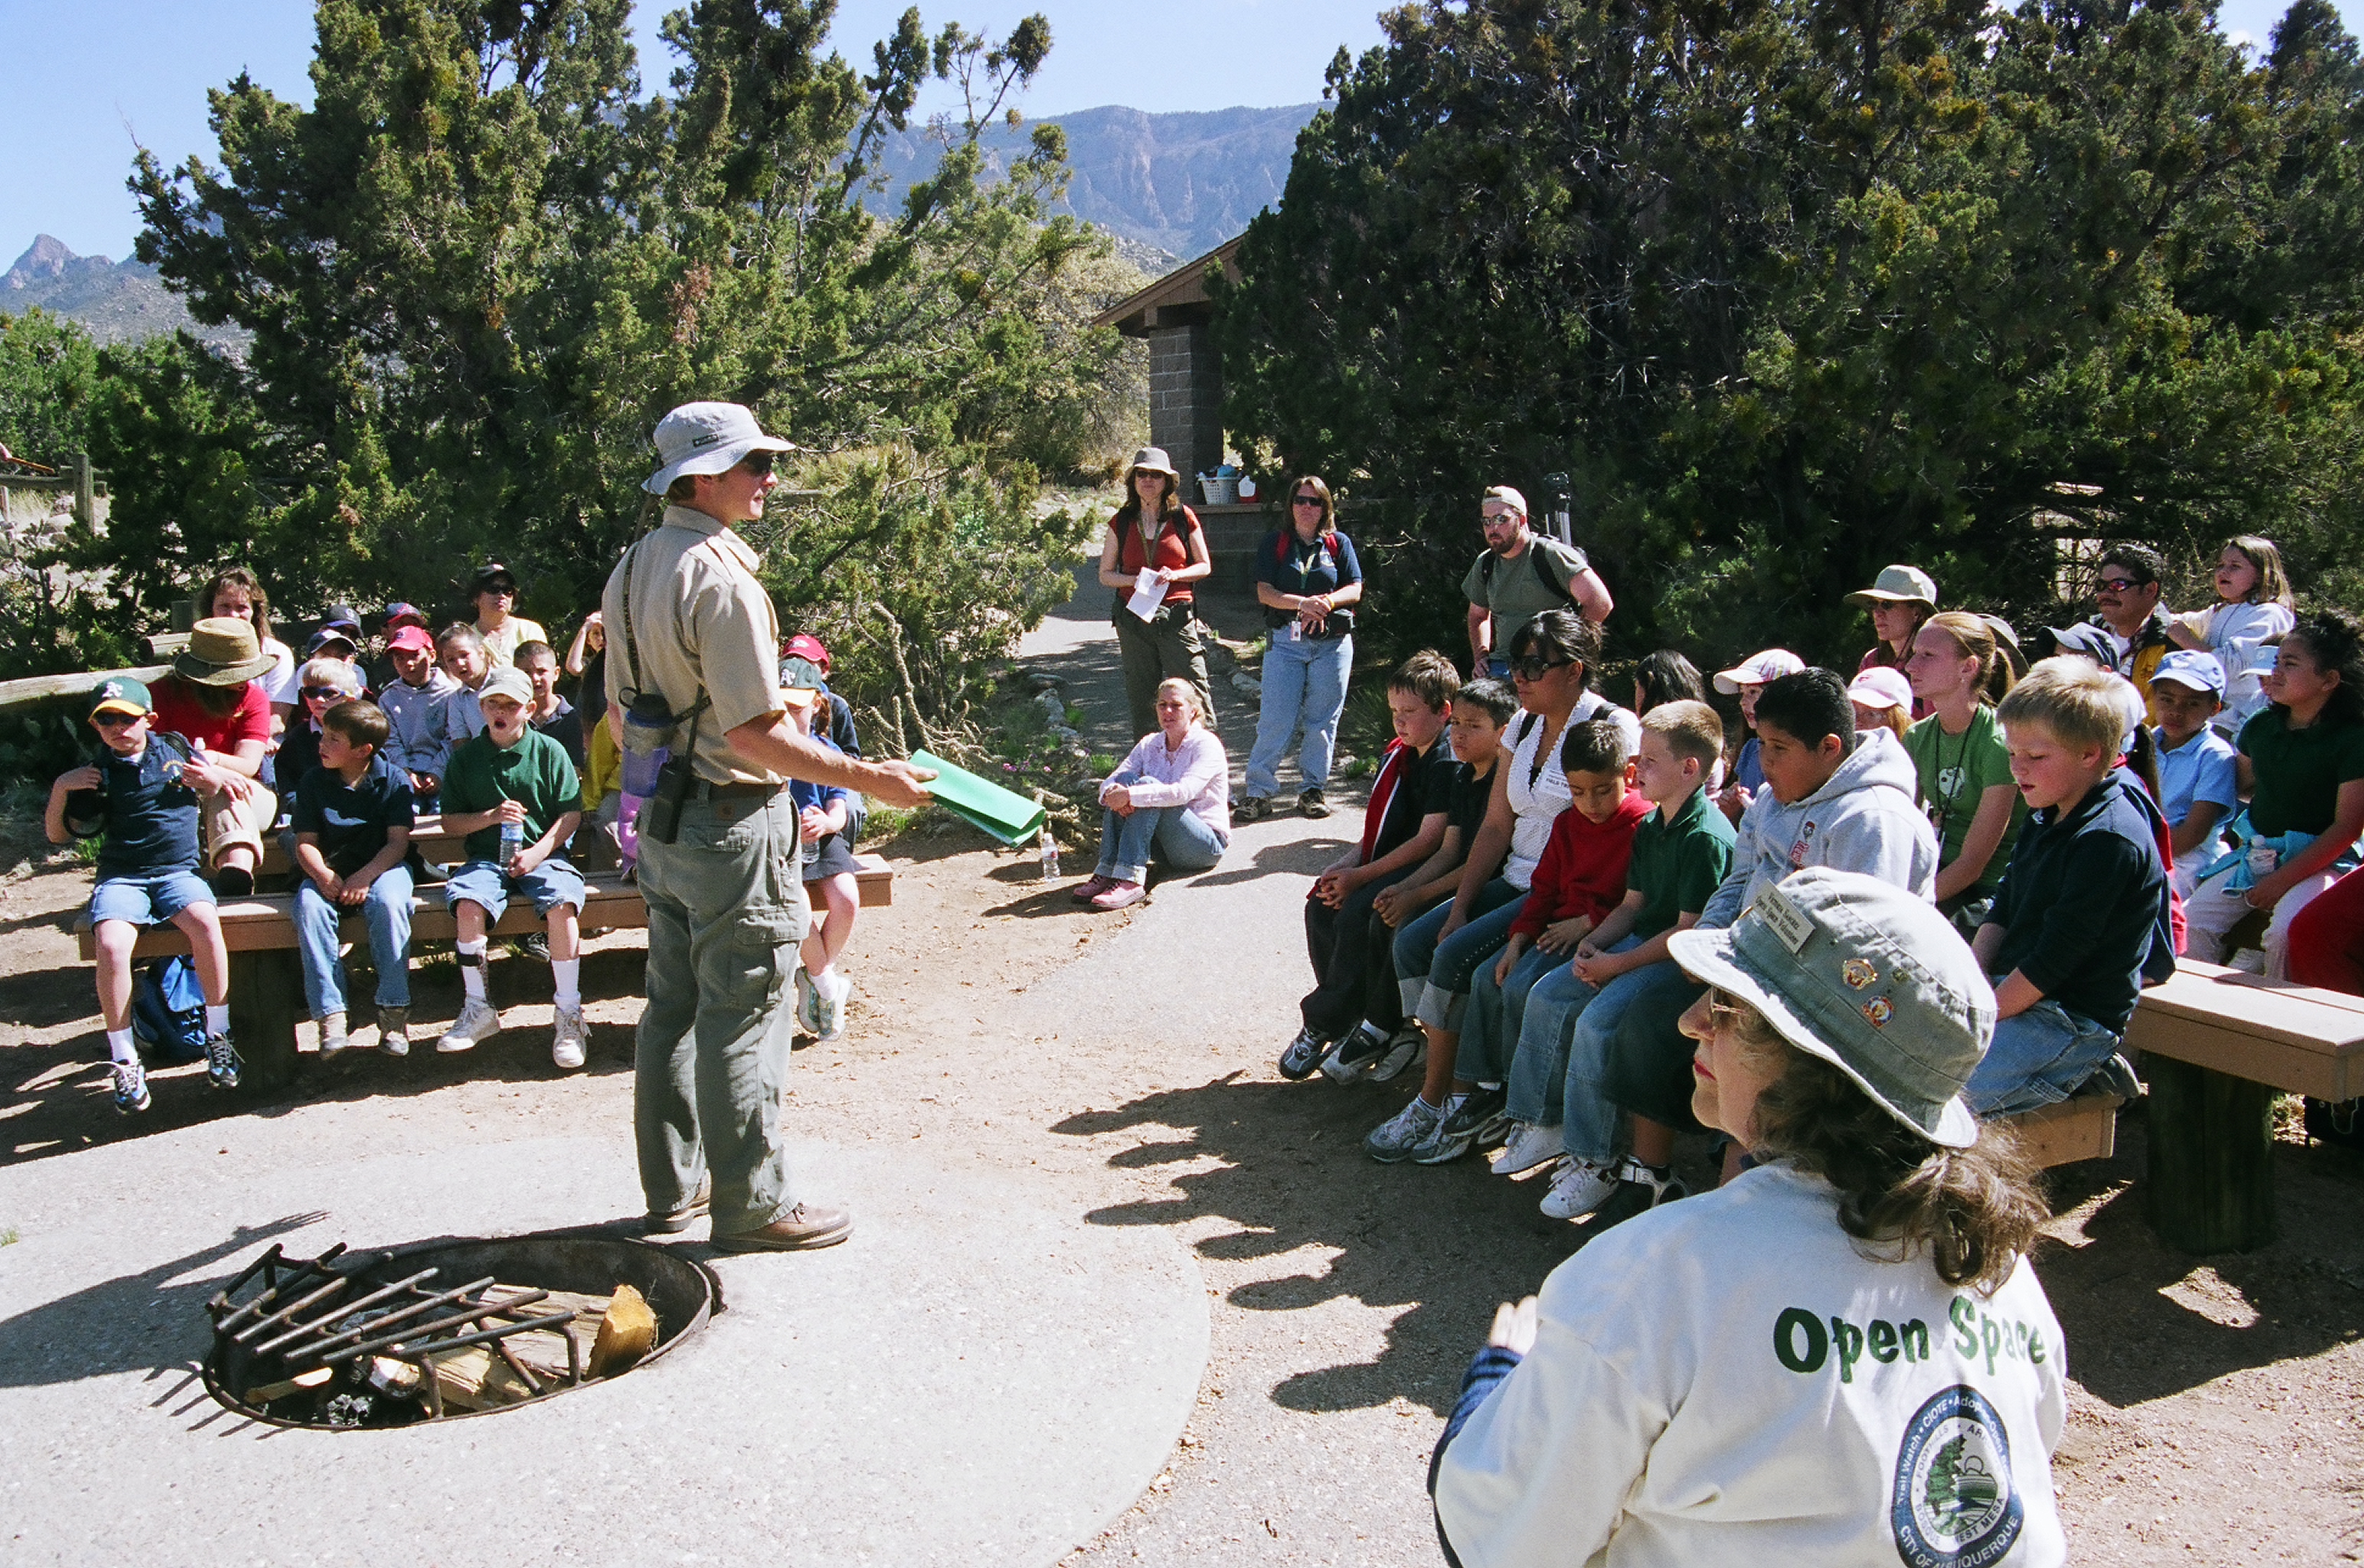 A group of kids and adults sitting on benches around a fire pit listening to an Open Space volunteer teach.